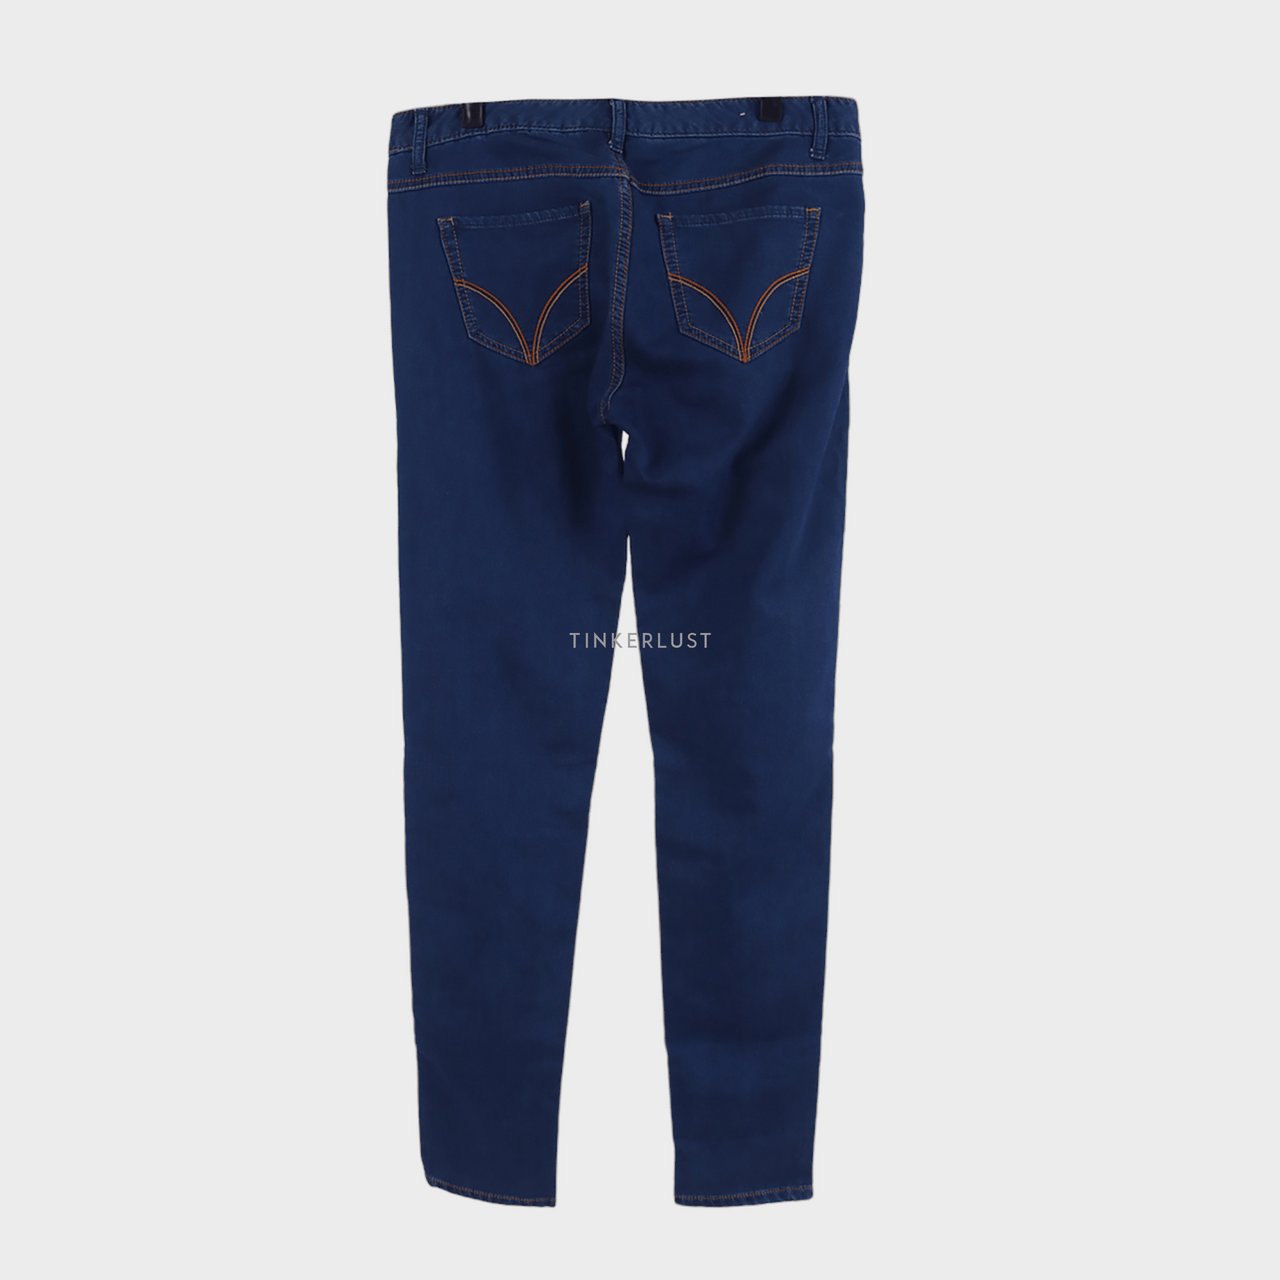 Giordano Soft Jeans Long Pants